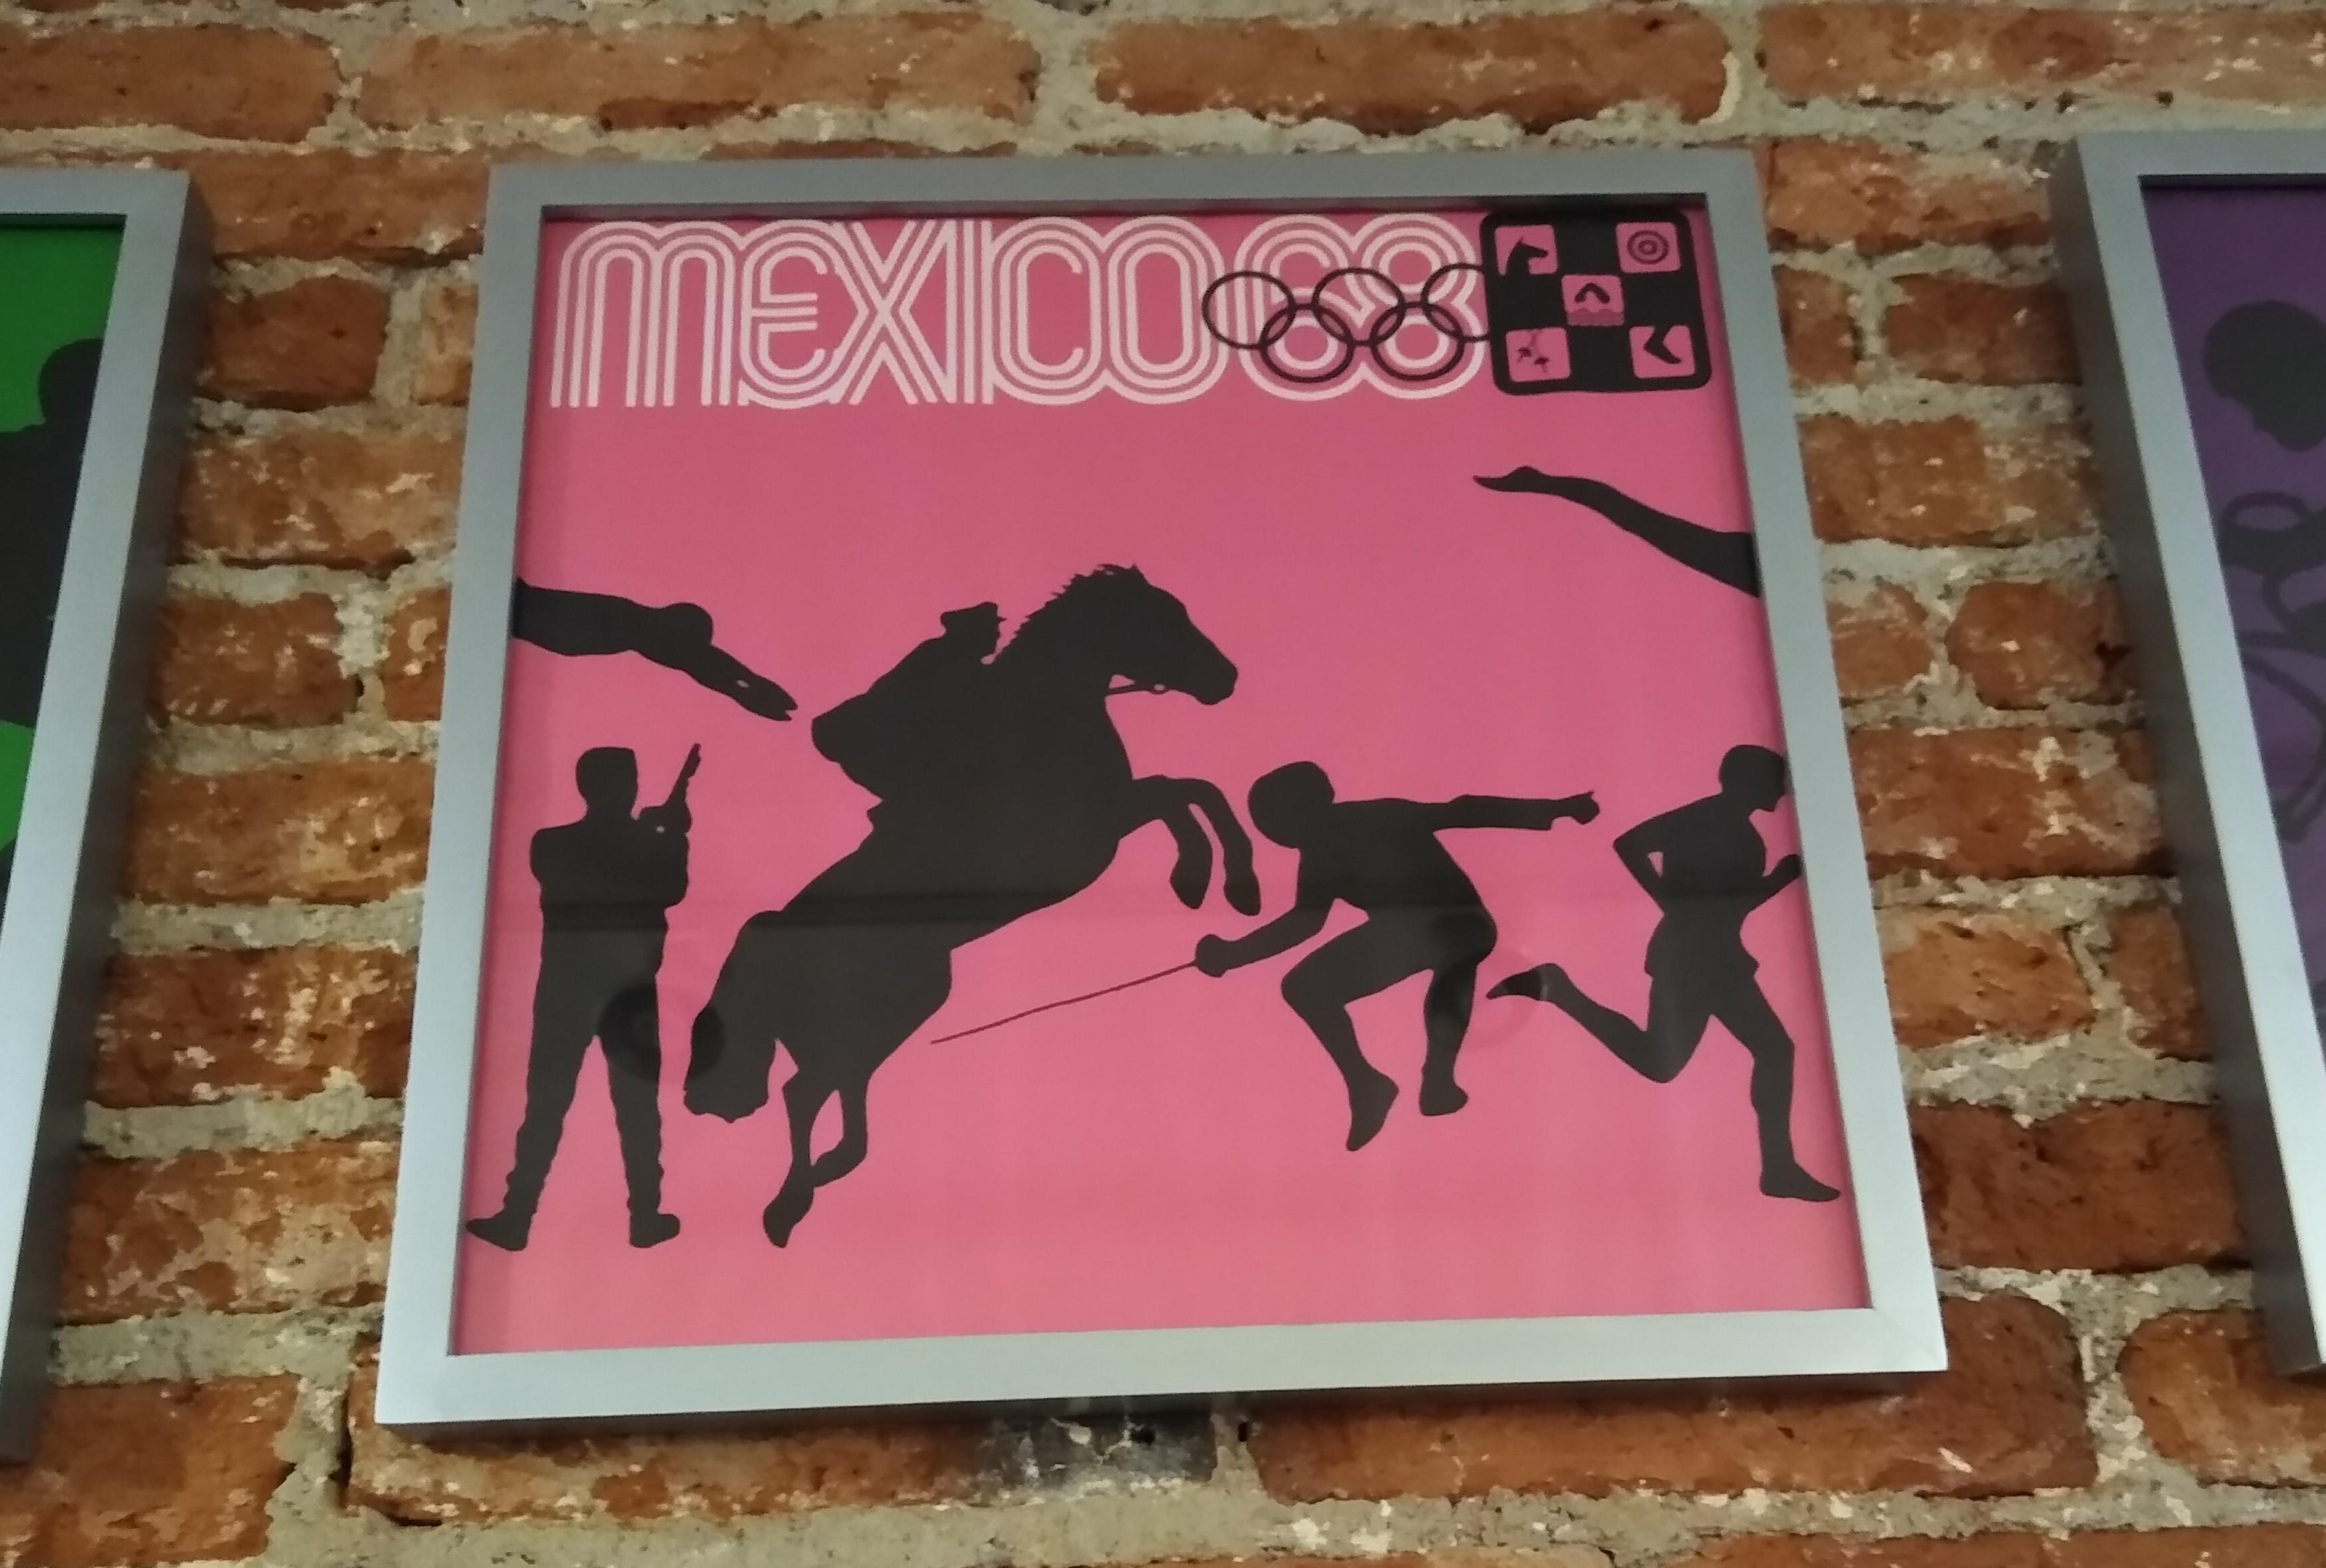 Mexico 68 Olympics Original Posters with Pictograms for Each Sport Discipline For Sale 5